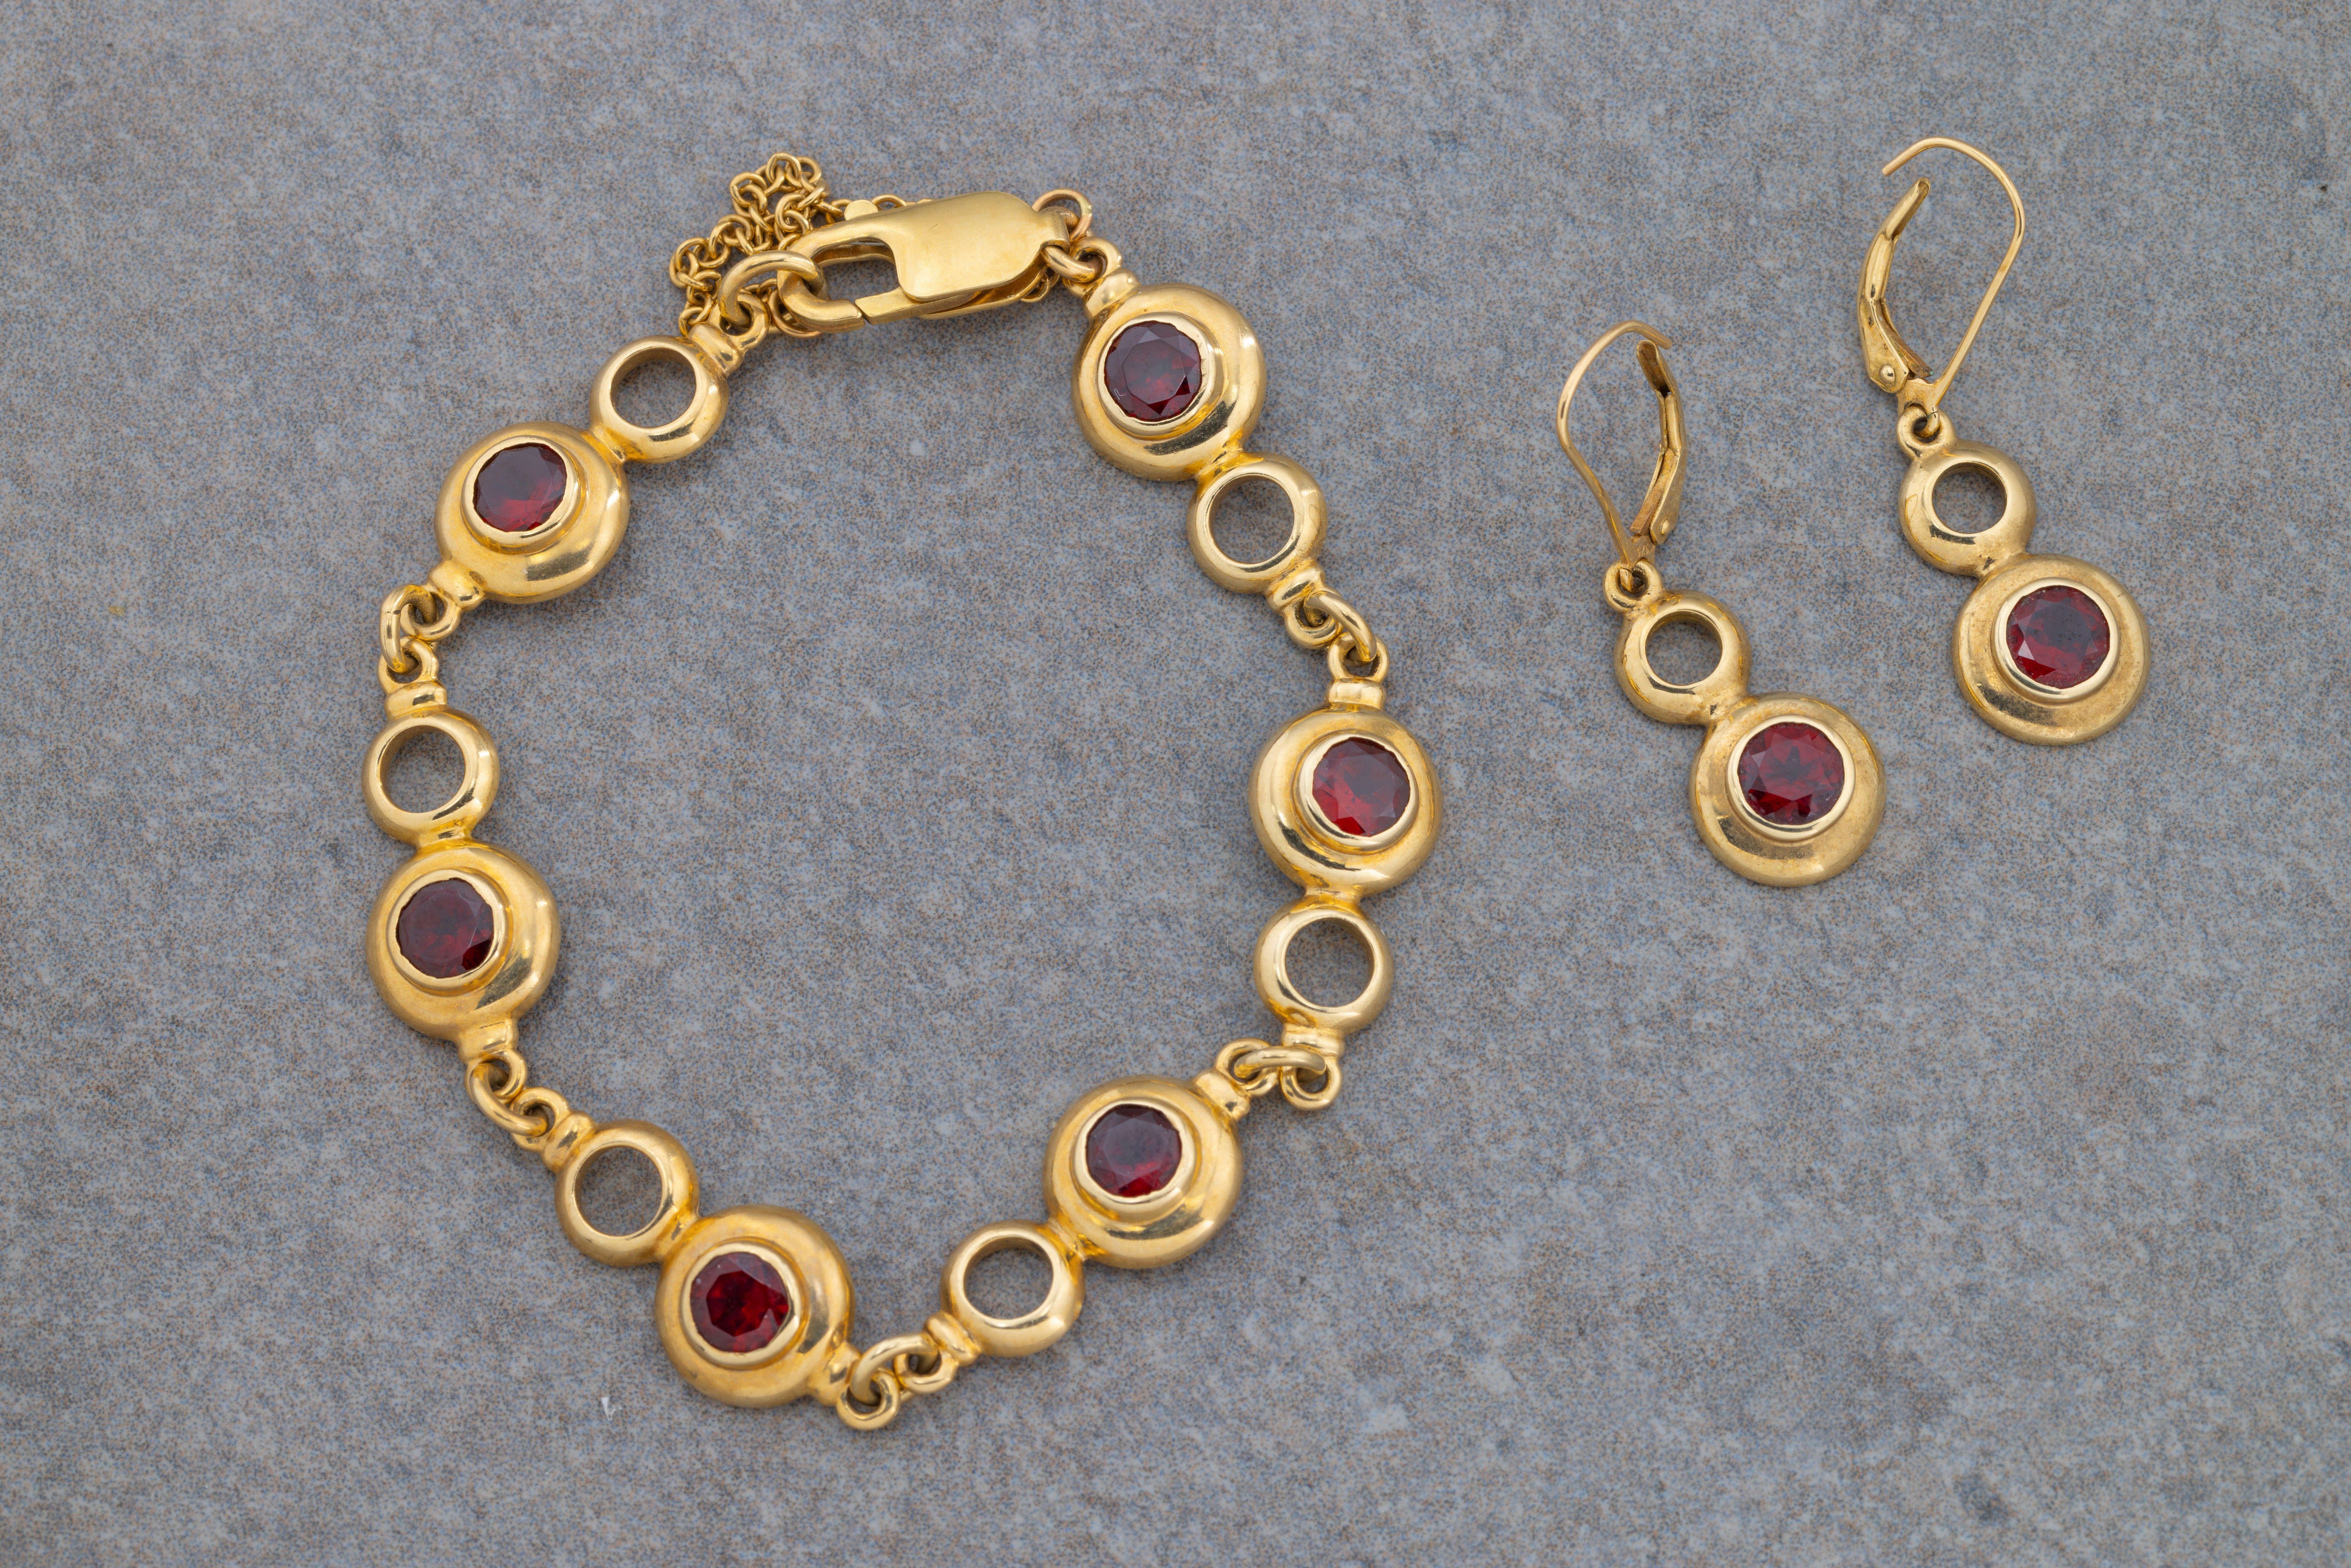 A 9ct yellow gold and garnet bracelet and matching earrings